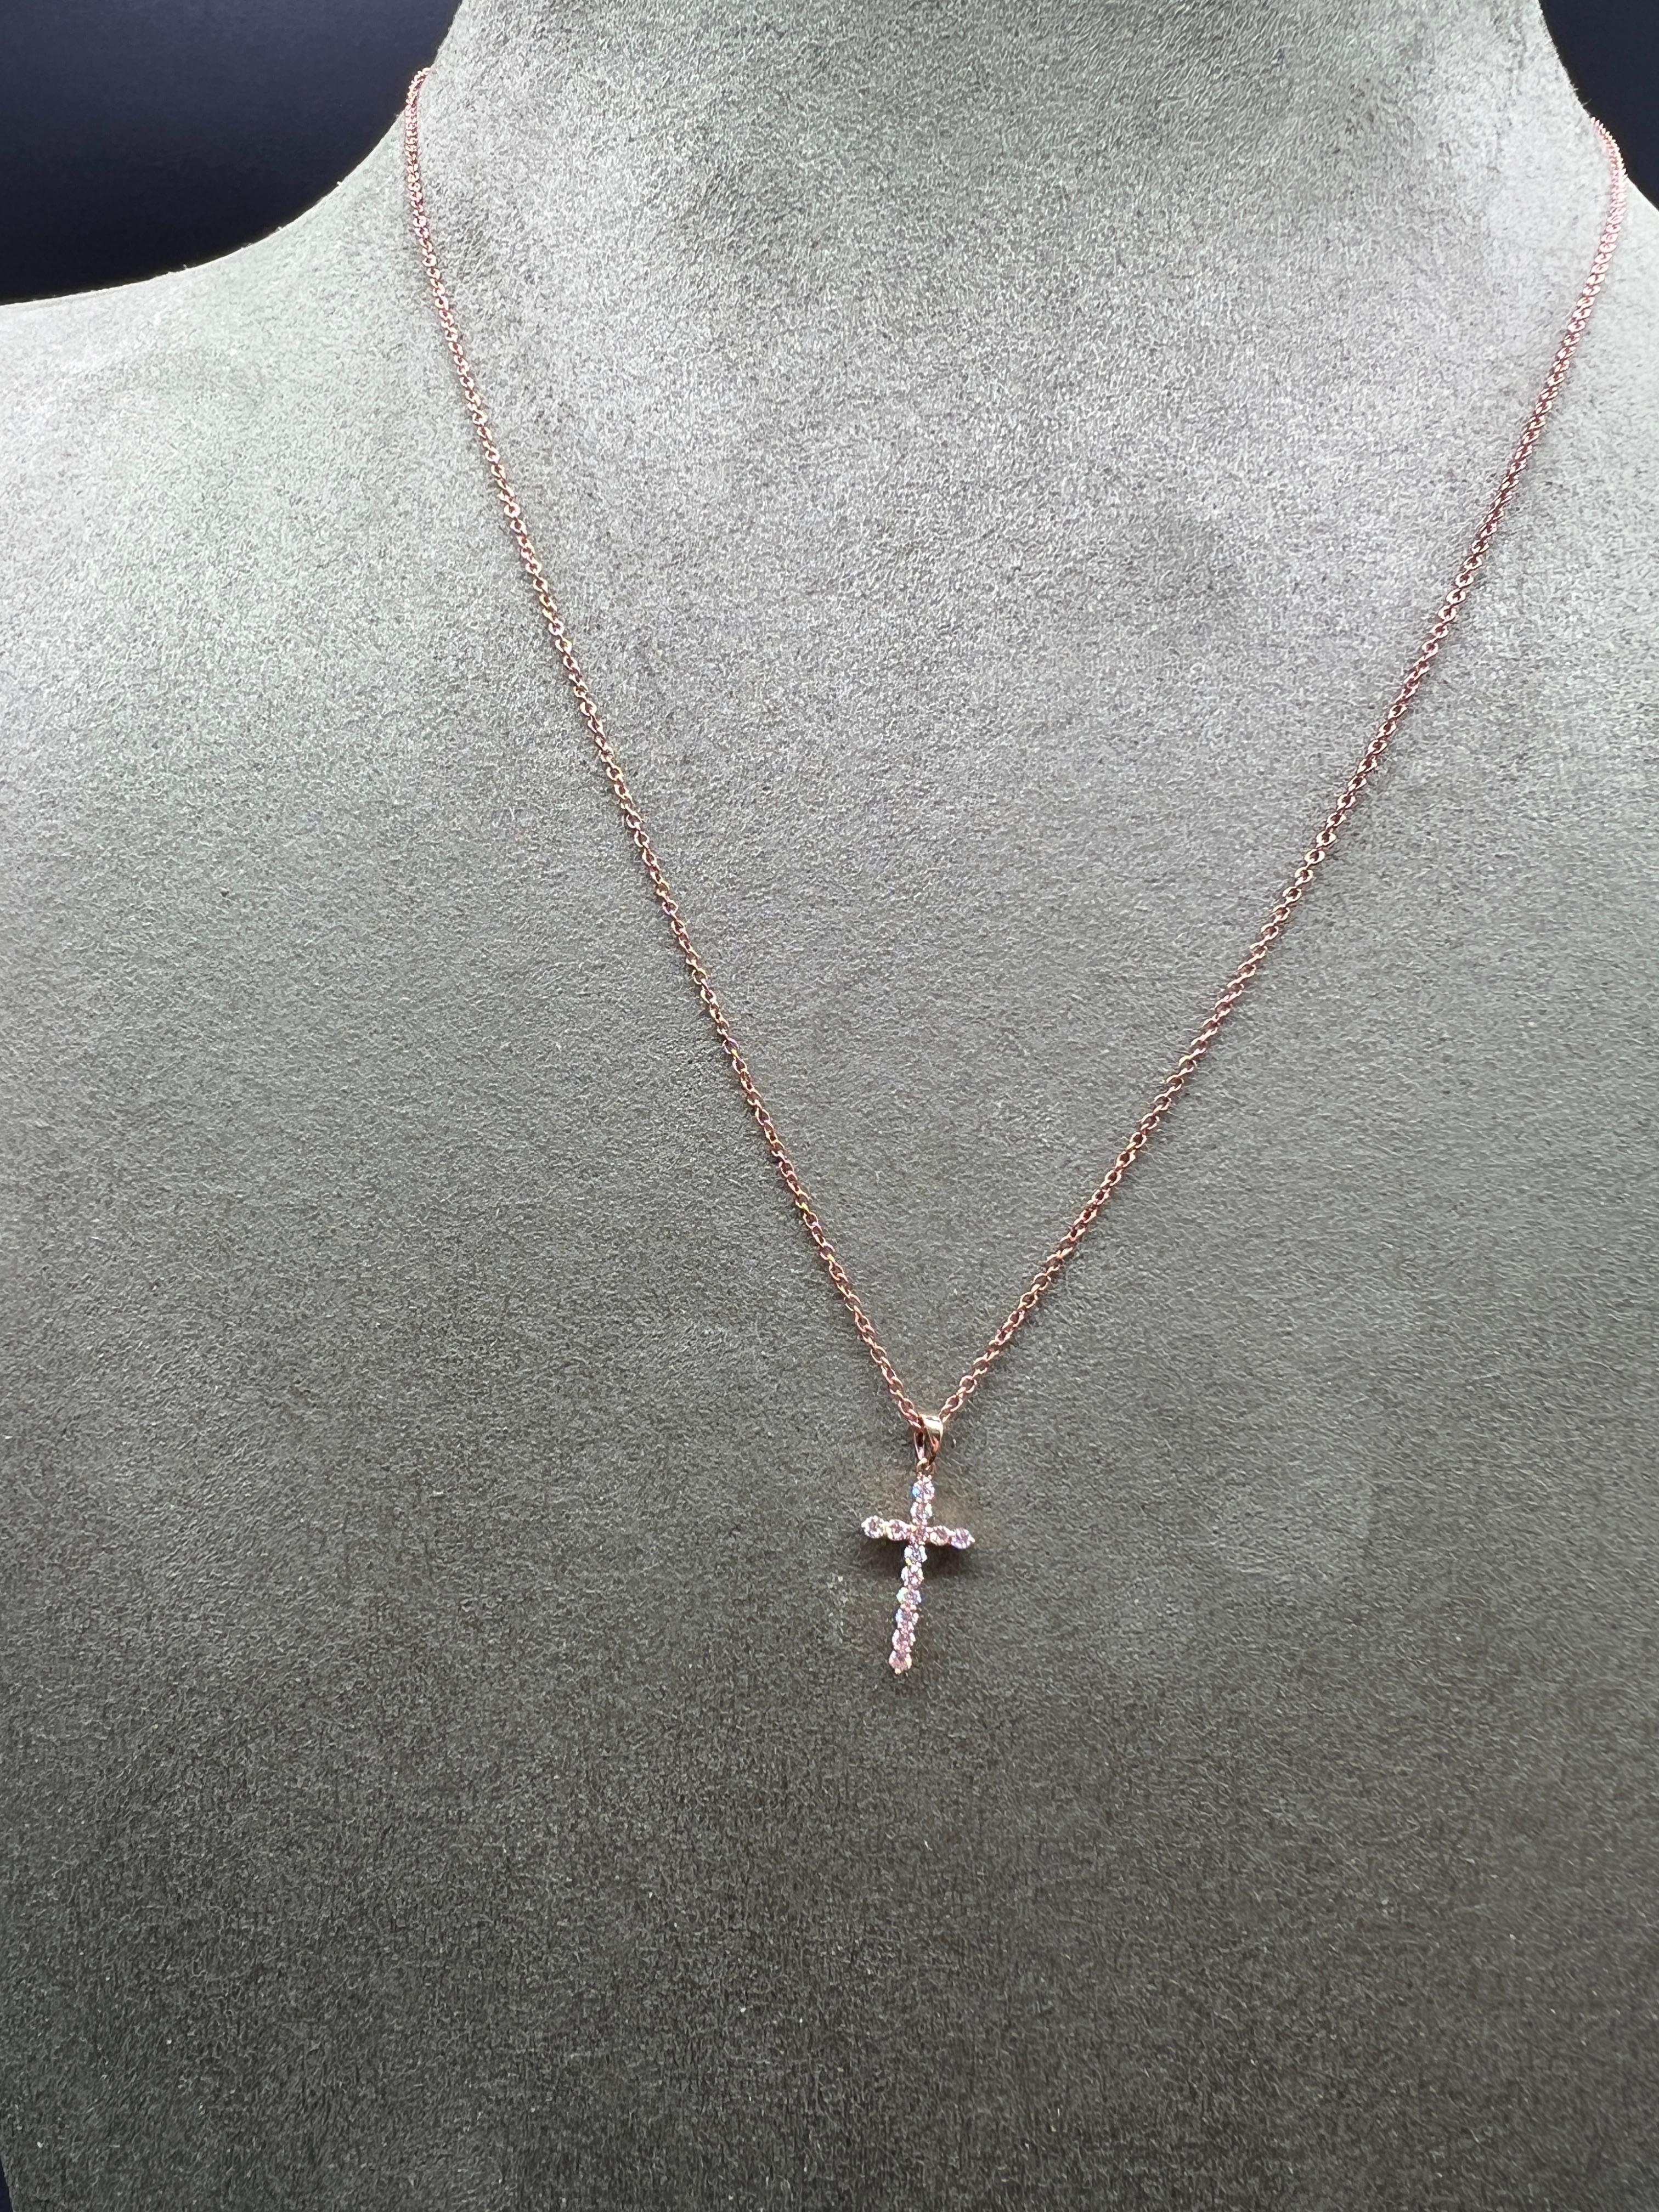 Pendent Cross Necklace Shape Diamond Pink Gold 

Necklace pendant in pink gold. 18 carats with a cross surmounted by 13 diamonds. 

Magnificent significant cross set with 13 brilliant cut diamonds. This necklace can be worn by the whole family and